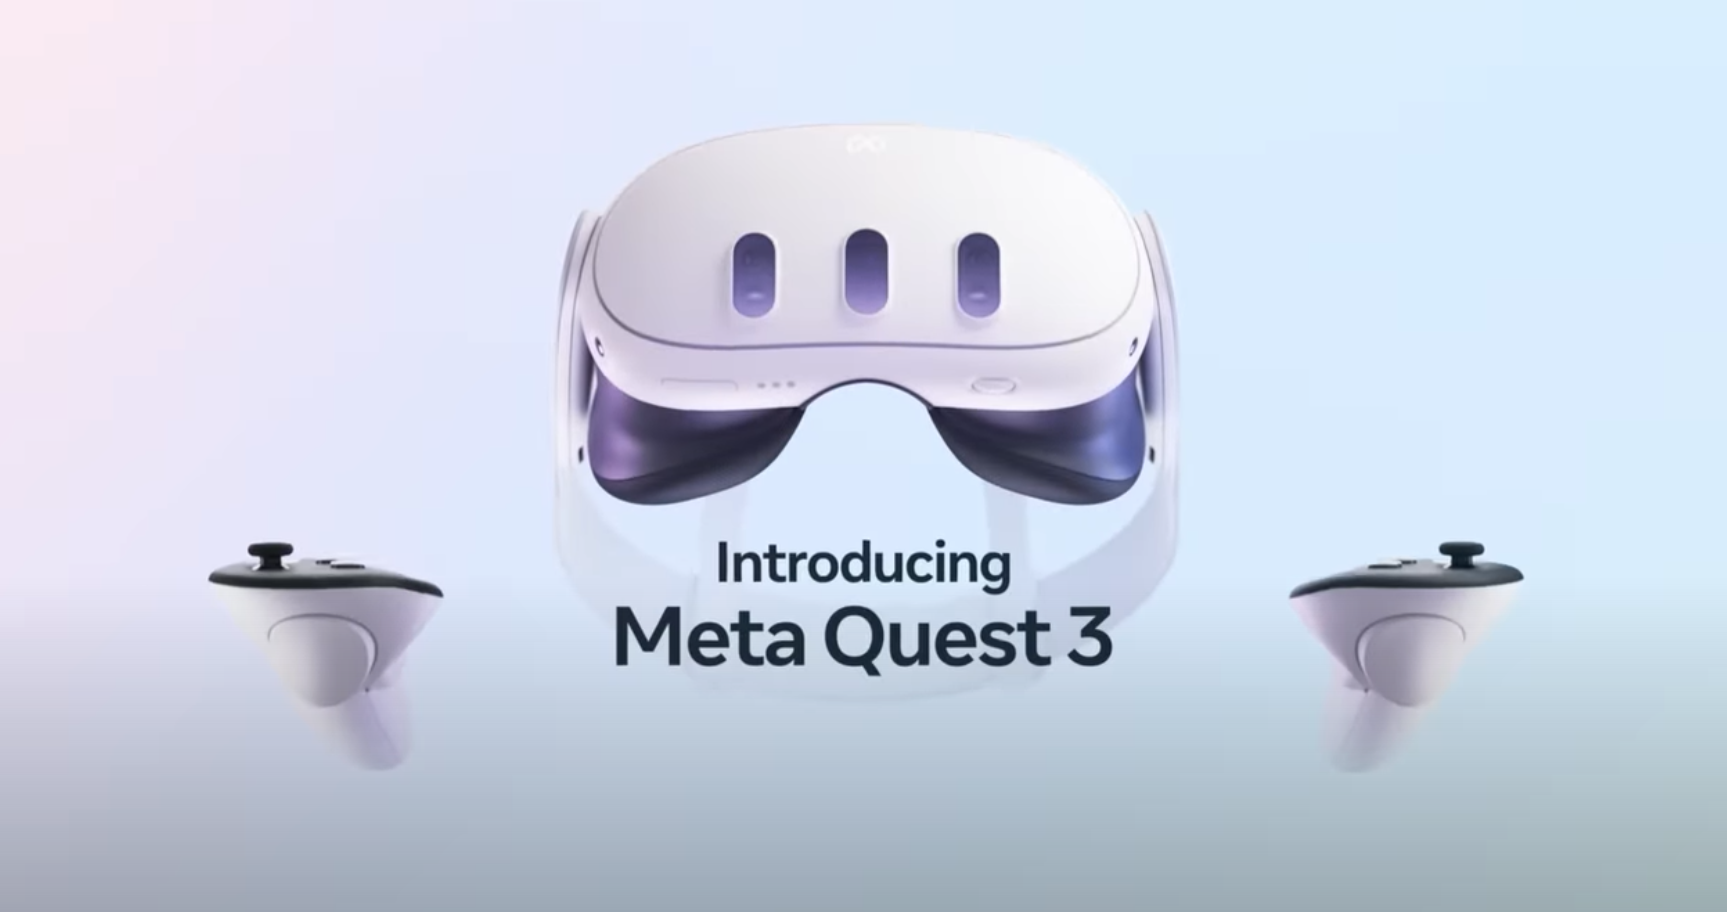 The new Meta Quest 3 mixed reality headset announced